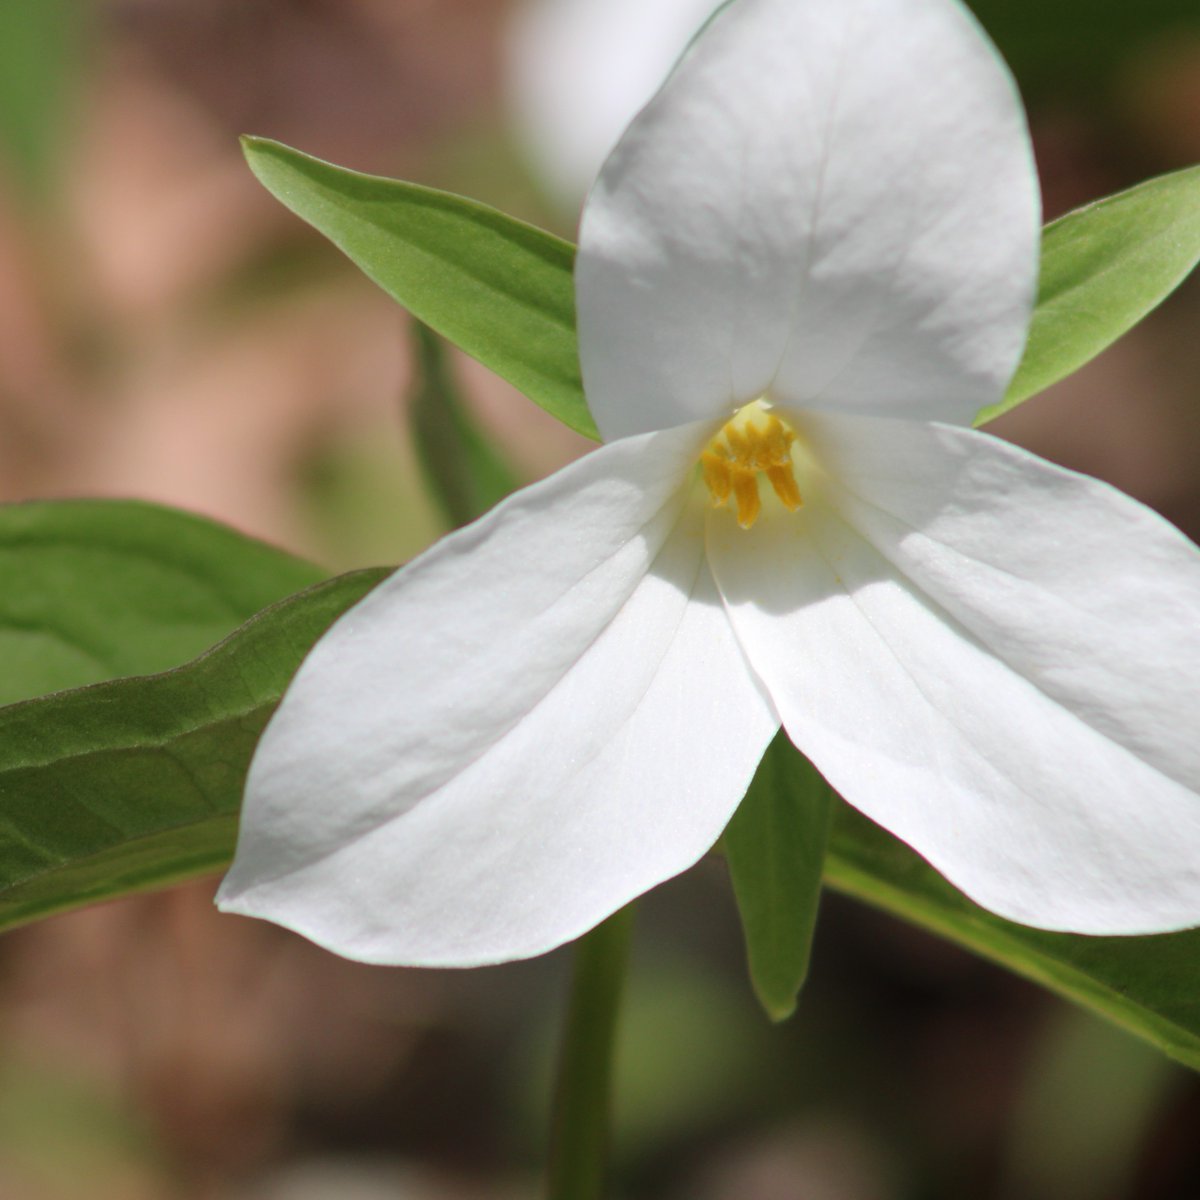 Only 3 days left until we welcome you back to the beauty of Killbear! 🌲 ✨ The trilliums are in full bloom and nature is calling your name. #KillbearPP